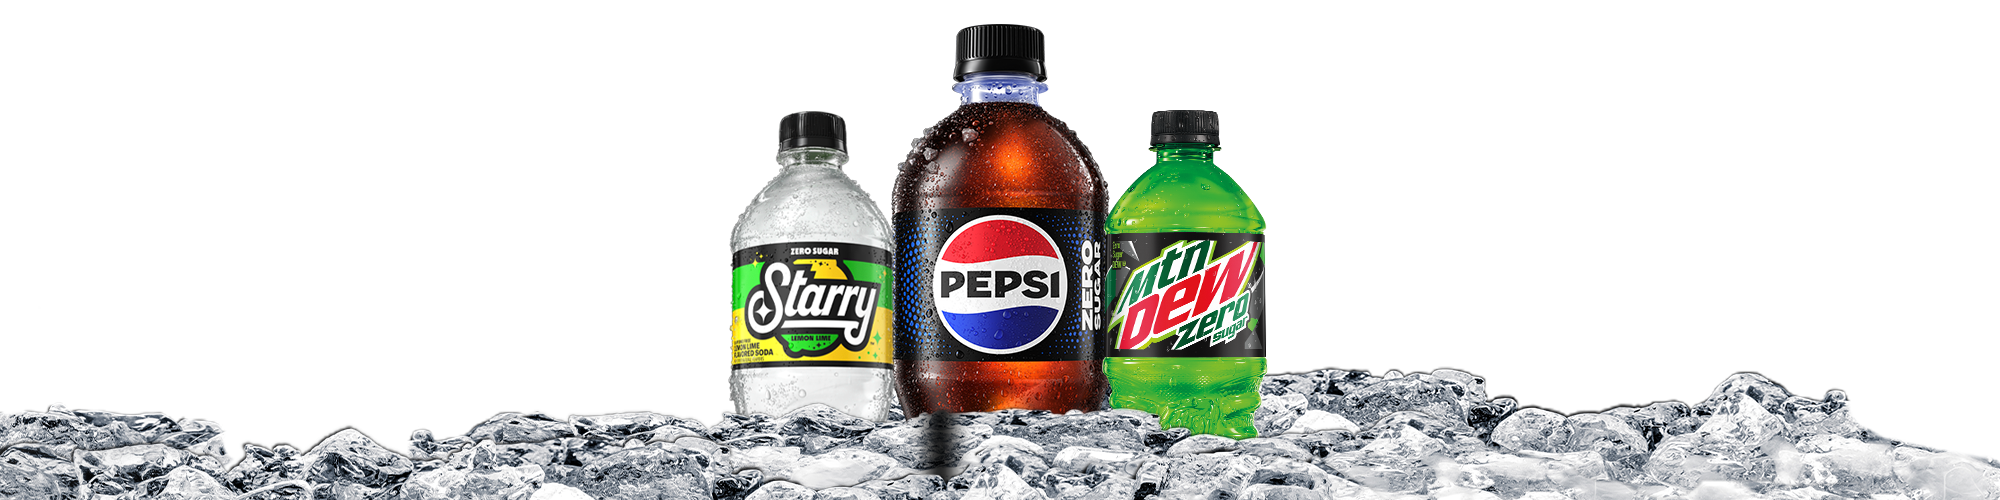 Image of Zero Sugar Brands eligible in our promotion - from Mtn Dew to Pepsi Zero Sugar and Starry. Stay cool with them on ice.